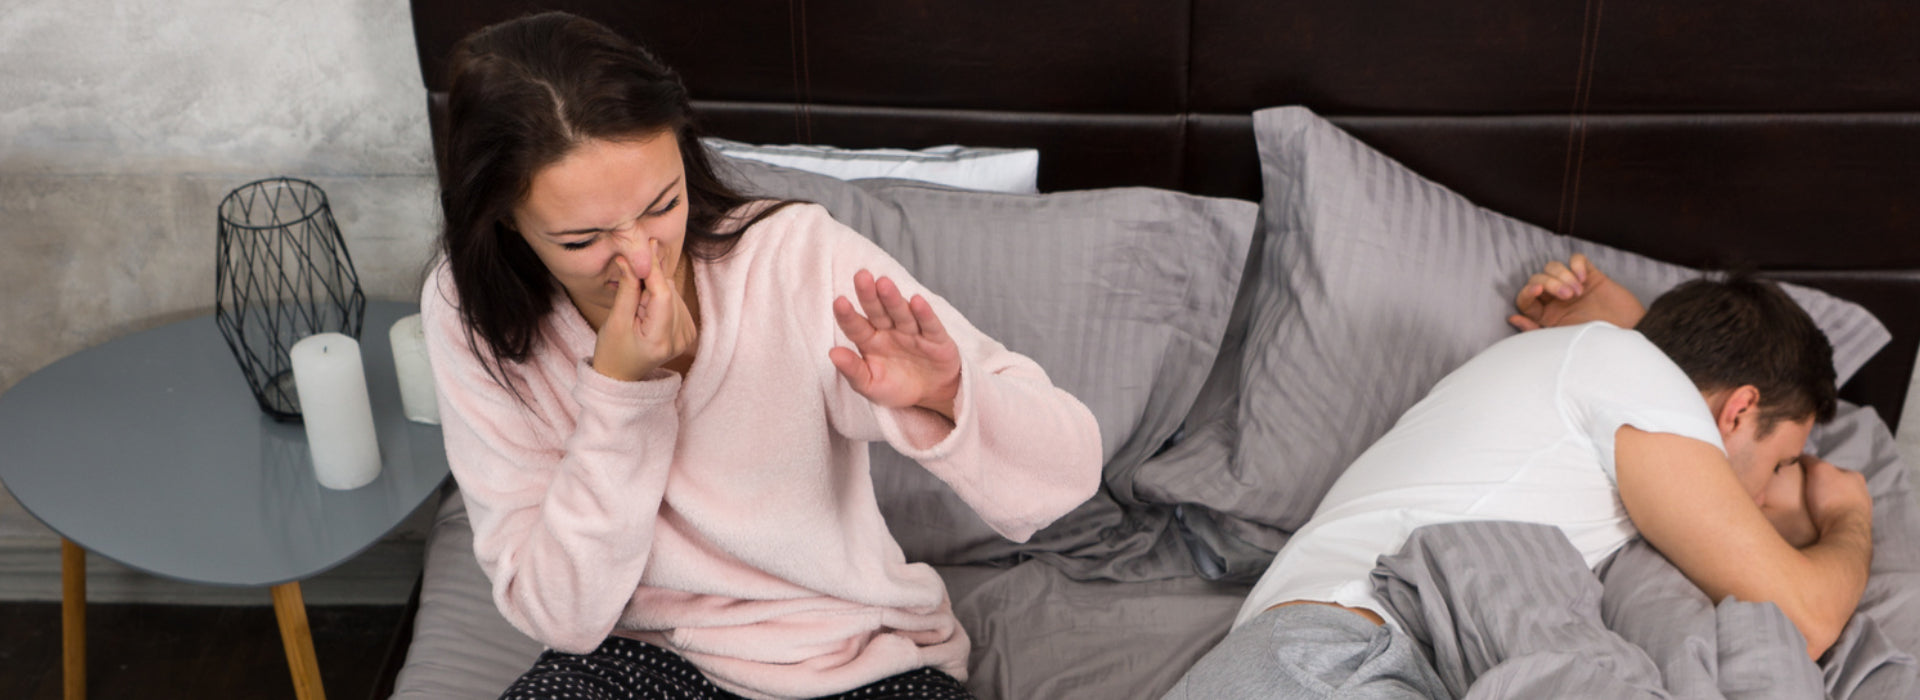 Period Farts: Why You're So Gassy on Your Period